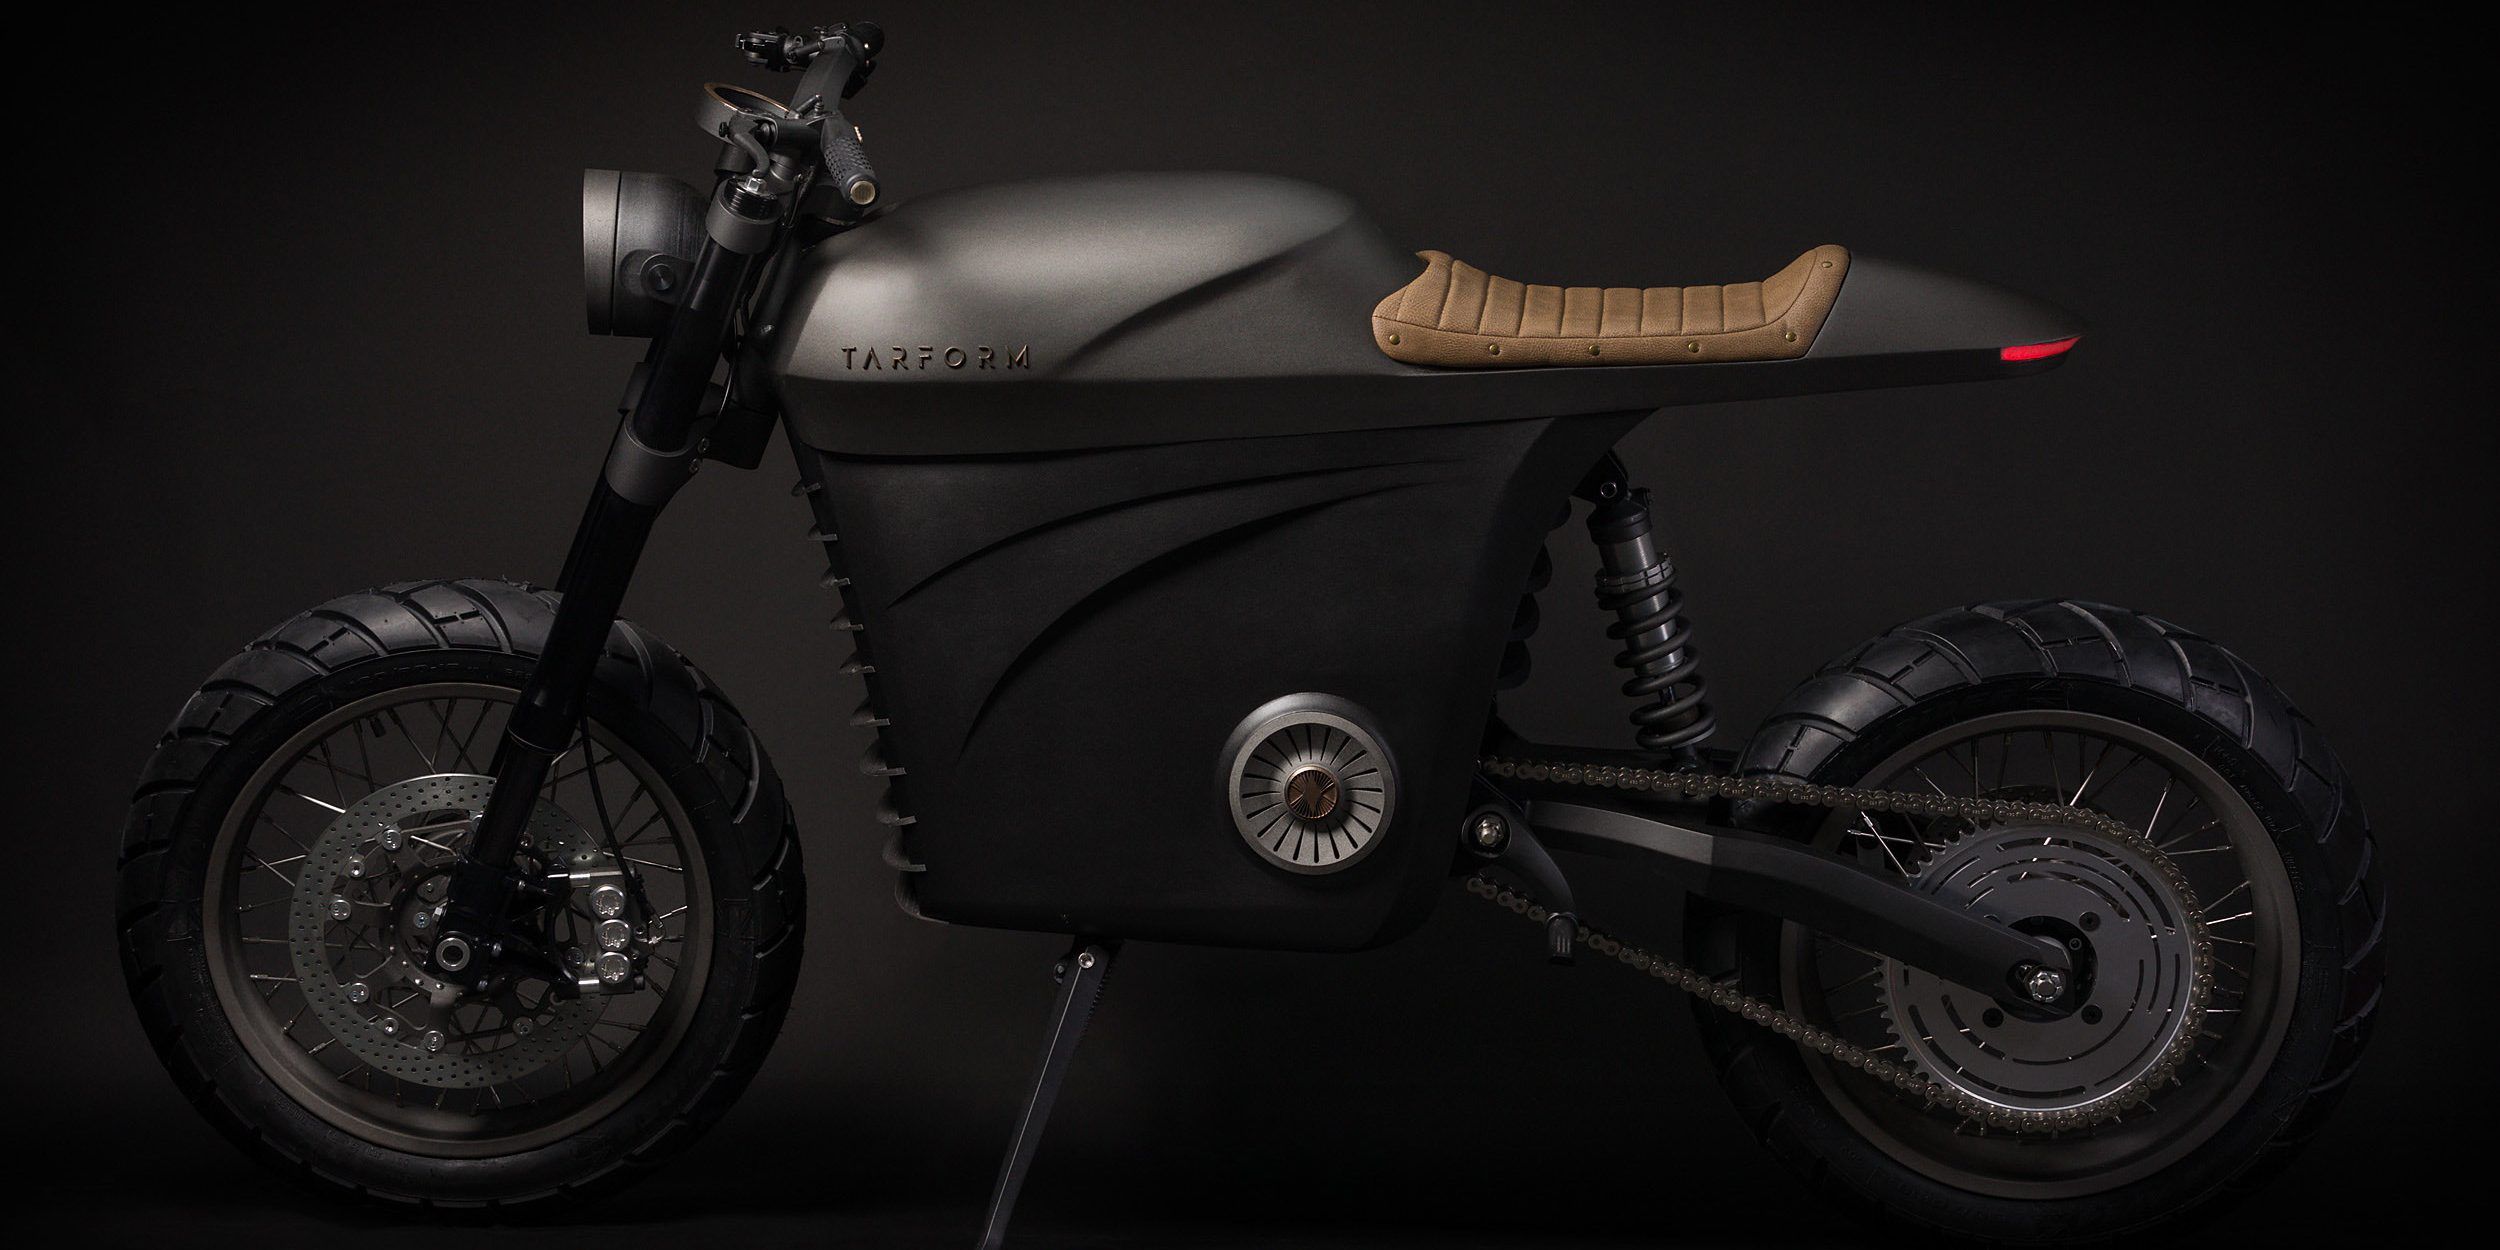 The Tarform Motorcycle Is A Retro Electric Bike